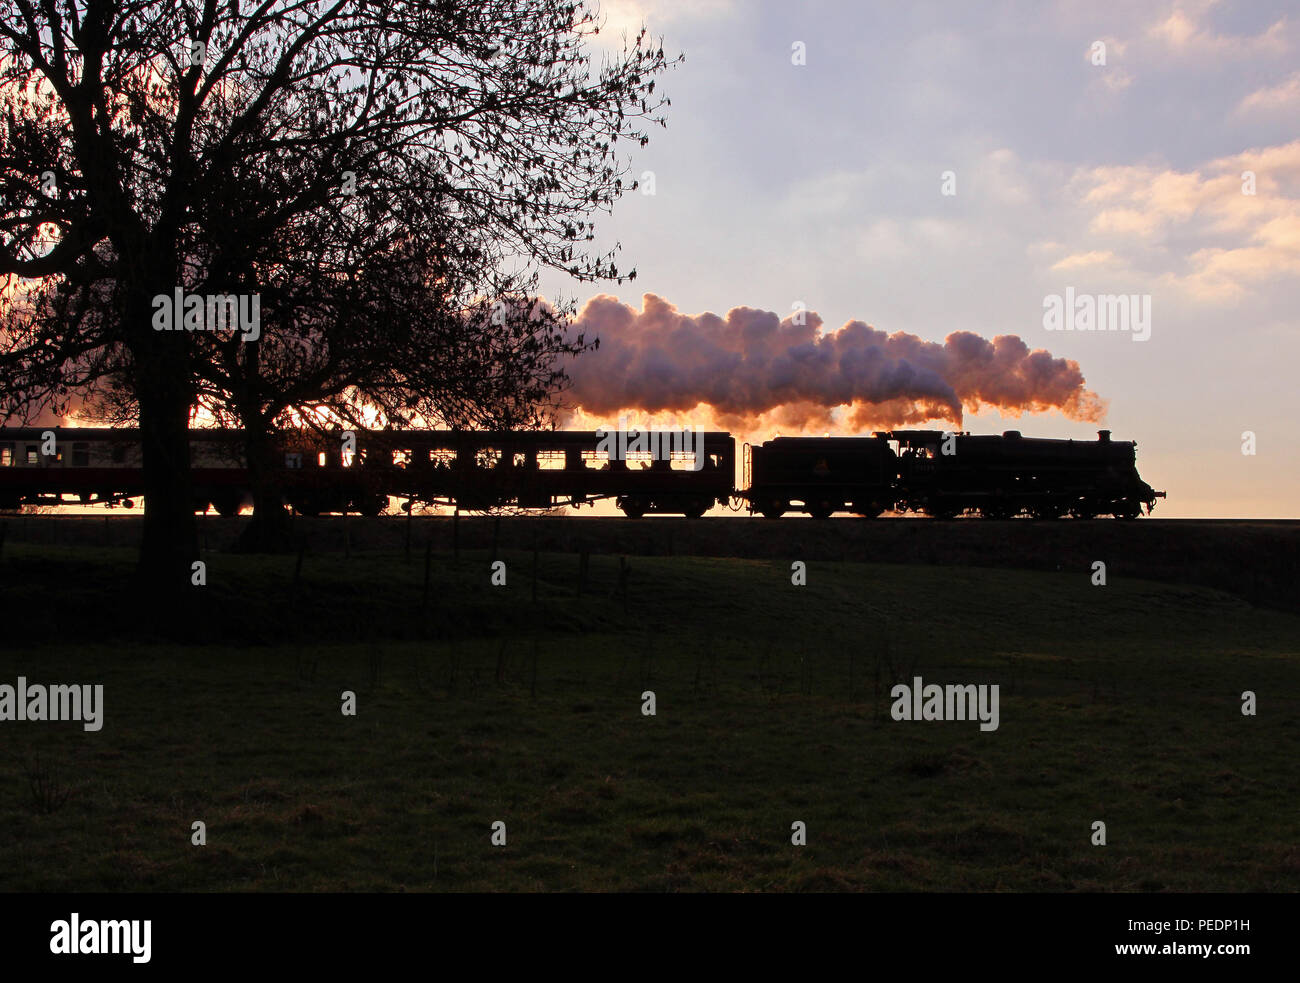 73129 passes Burrs sat Sunset on the ELR 29.1.11 Stock Photo